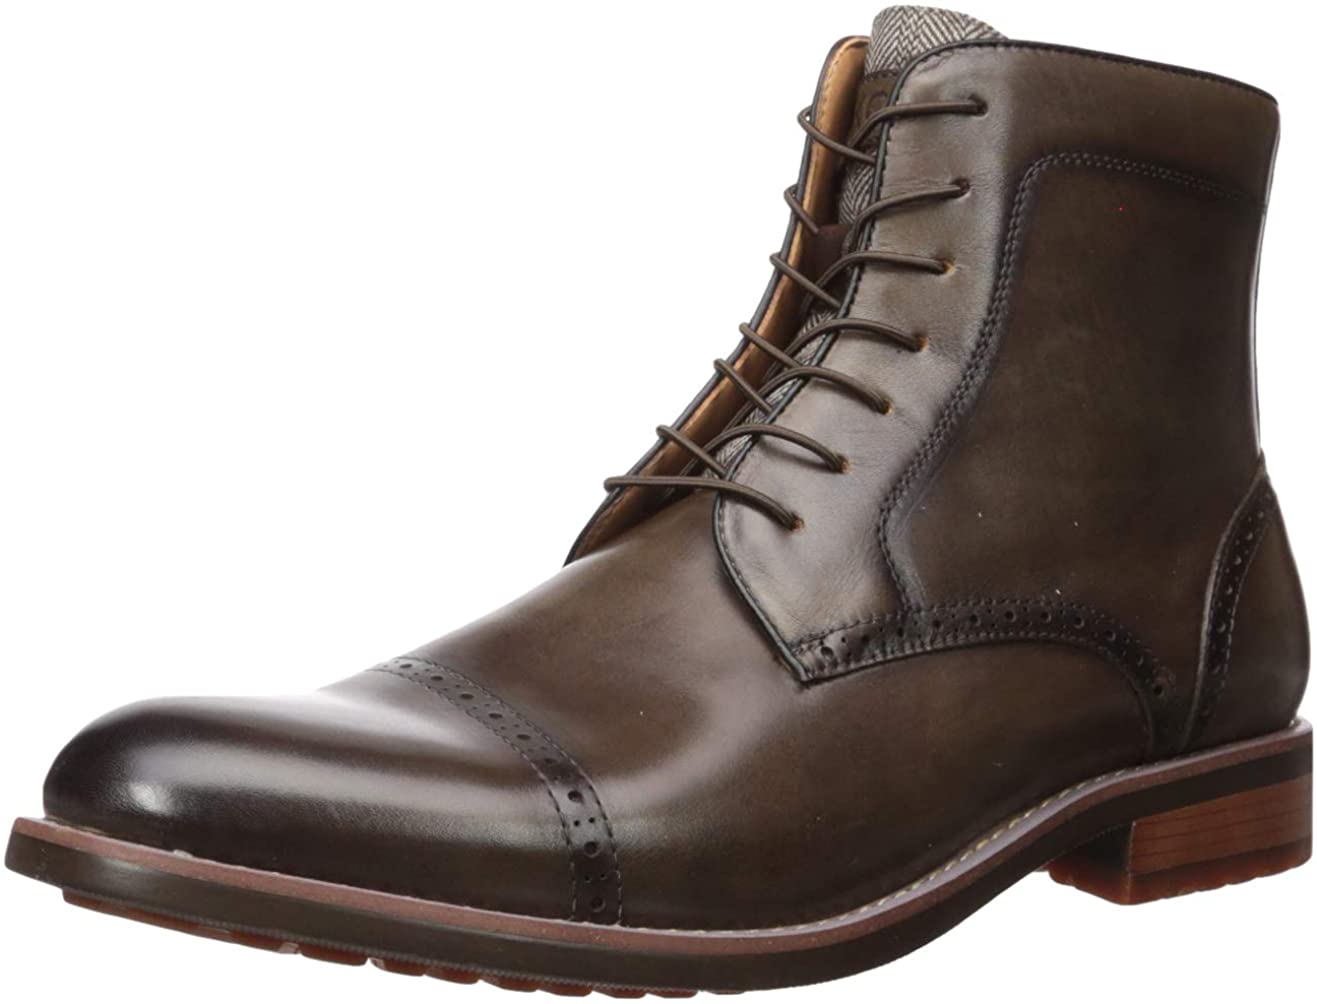 Kenneth Cole REACTION Men's Kelby Fashion Boot, Brown ...